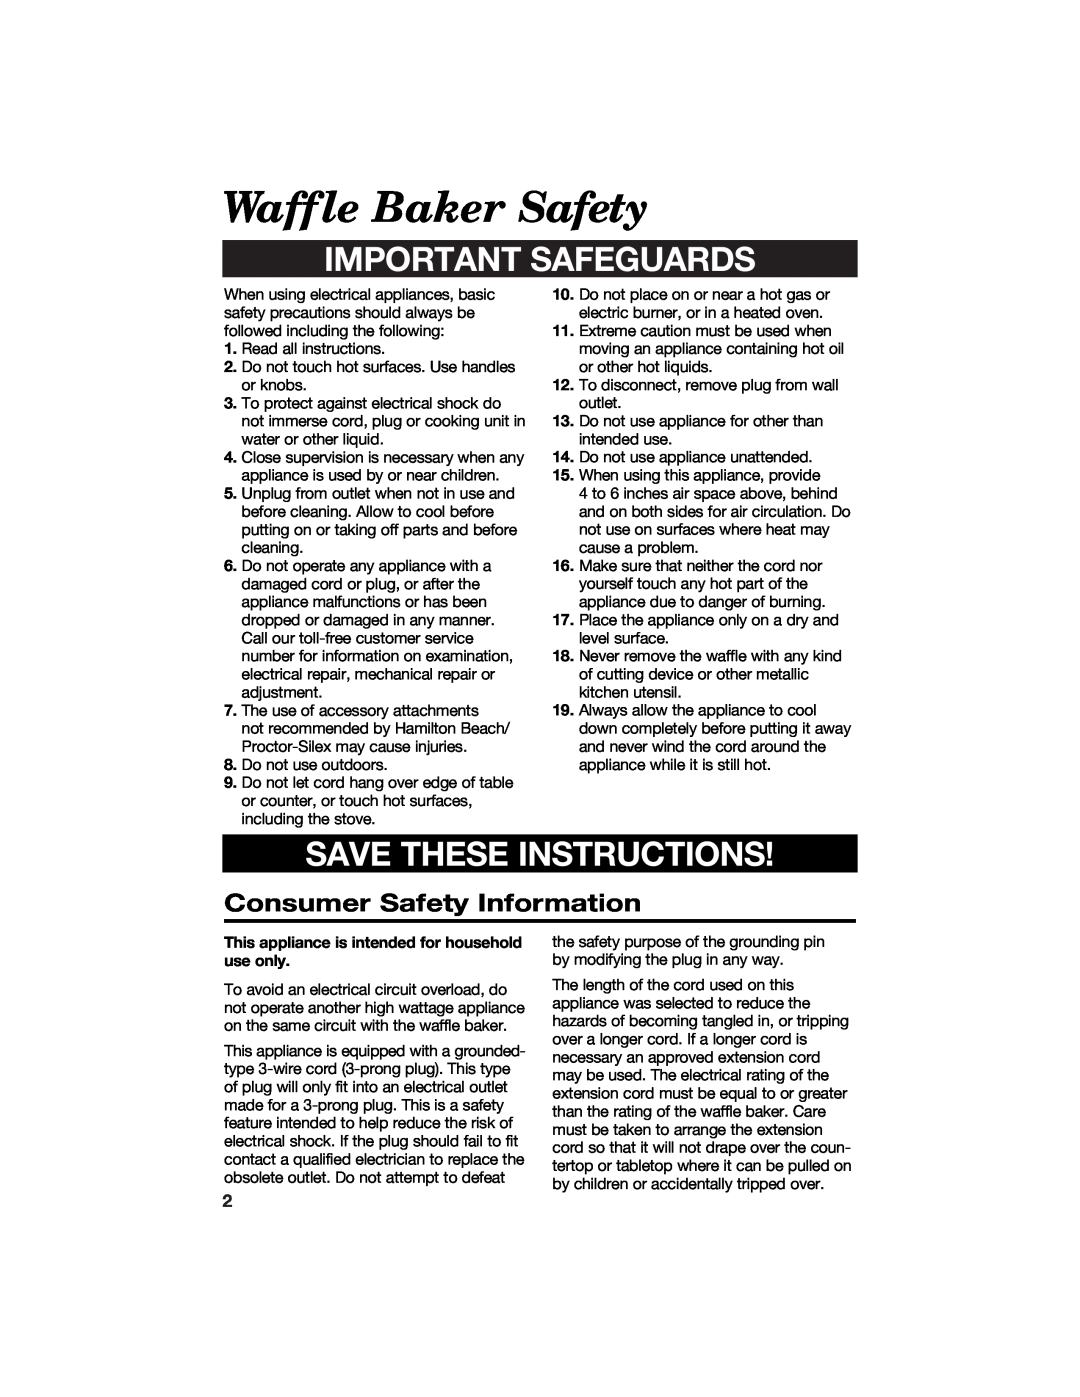 Hamilton Beach 840074500 Waffle Baker Safety, Consumer Safety Information, Important Safeguards, Save These Instructions 